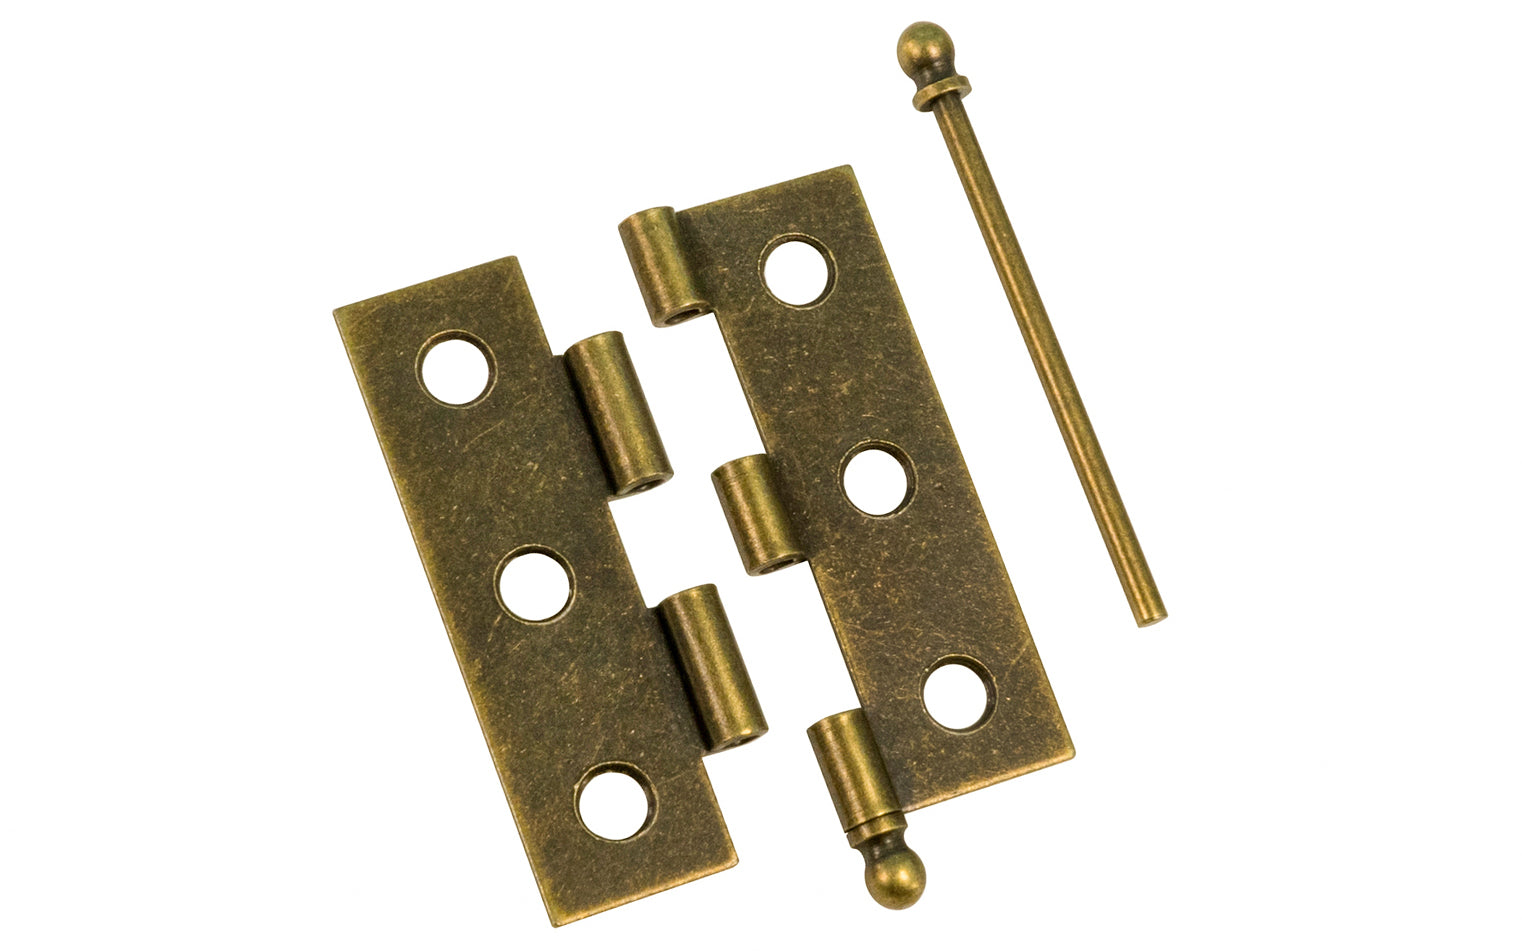 Traditional & classic ball-tip steel cabinet hinges with loose pins. Removable hinge pins which makes for easy installation when working with cabinets. 2" high x 1-3/8" wide. Sold as a pair of hinges. Antique Brass finish.